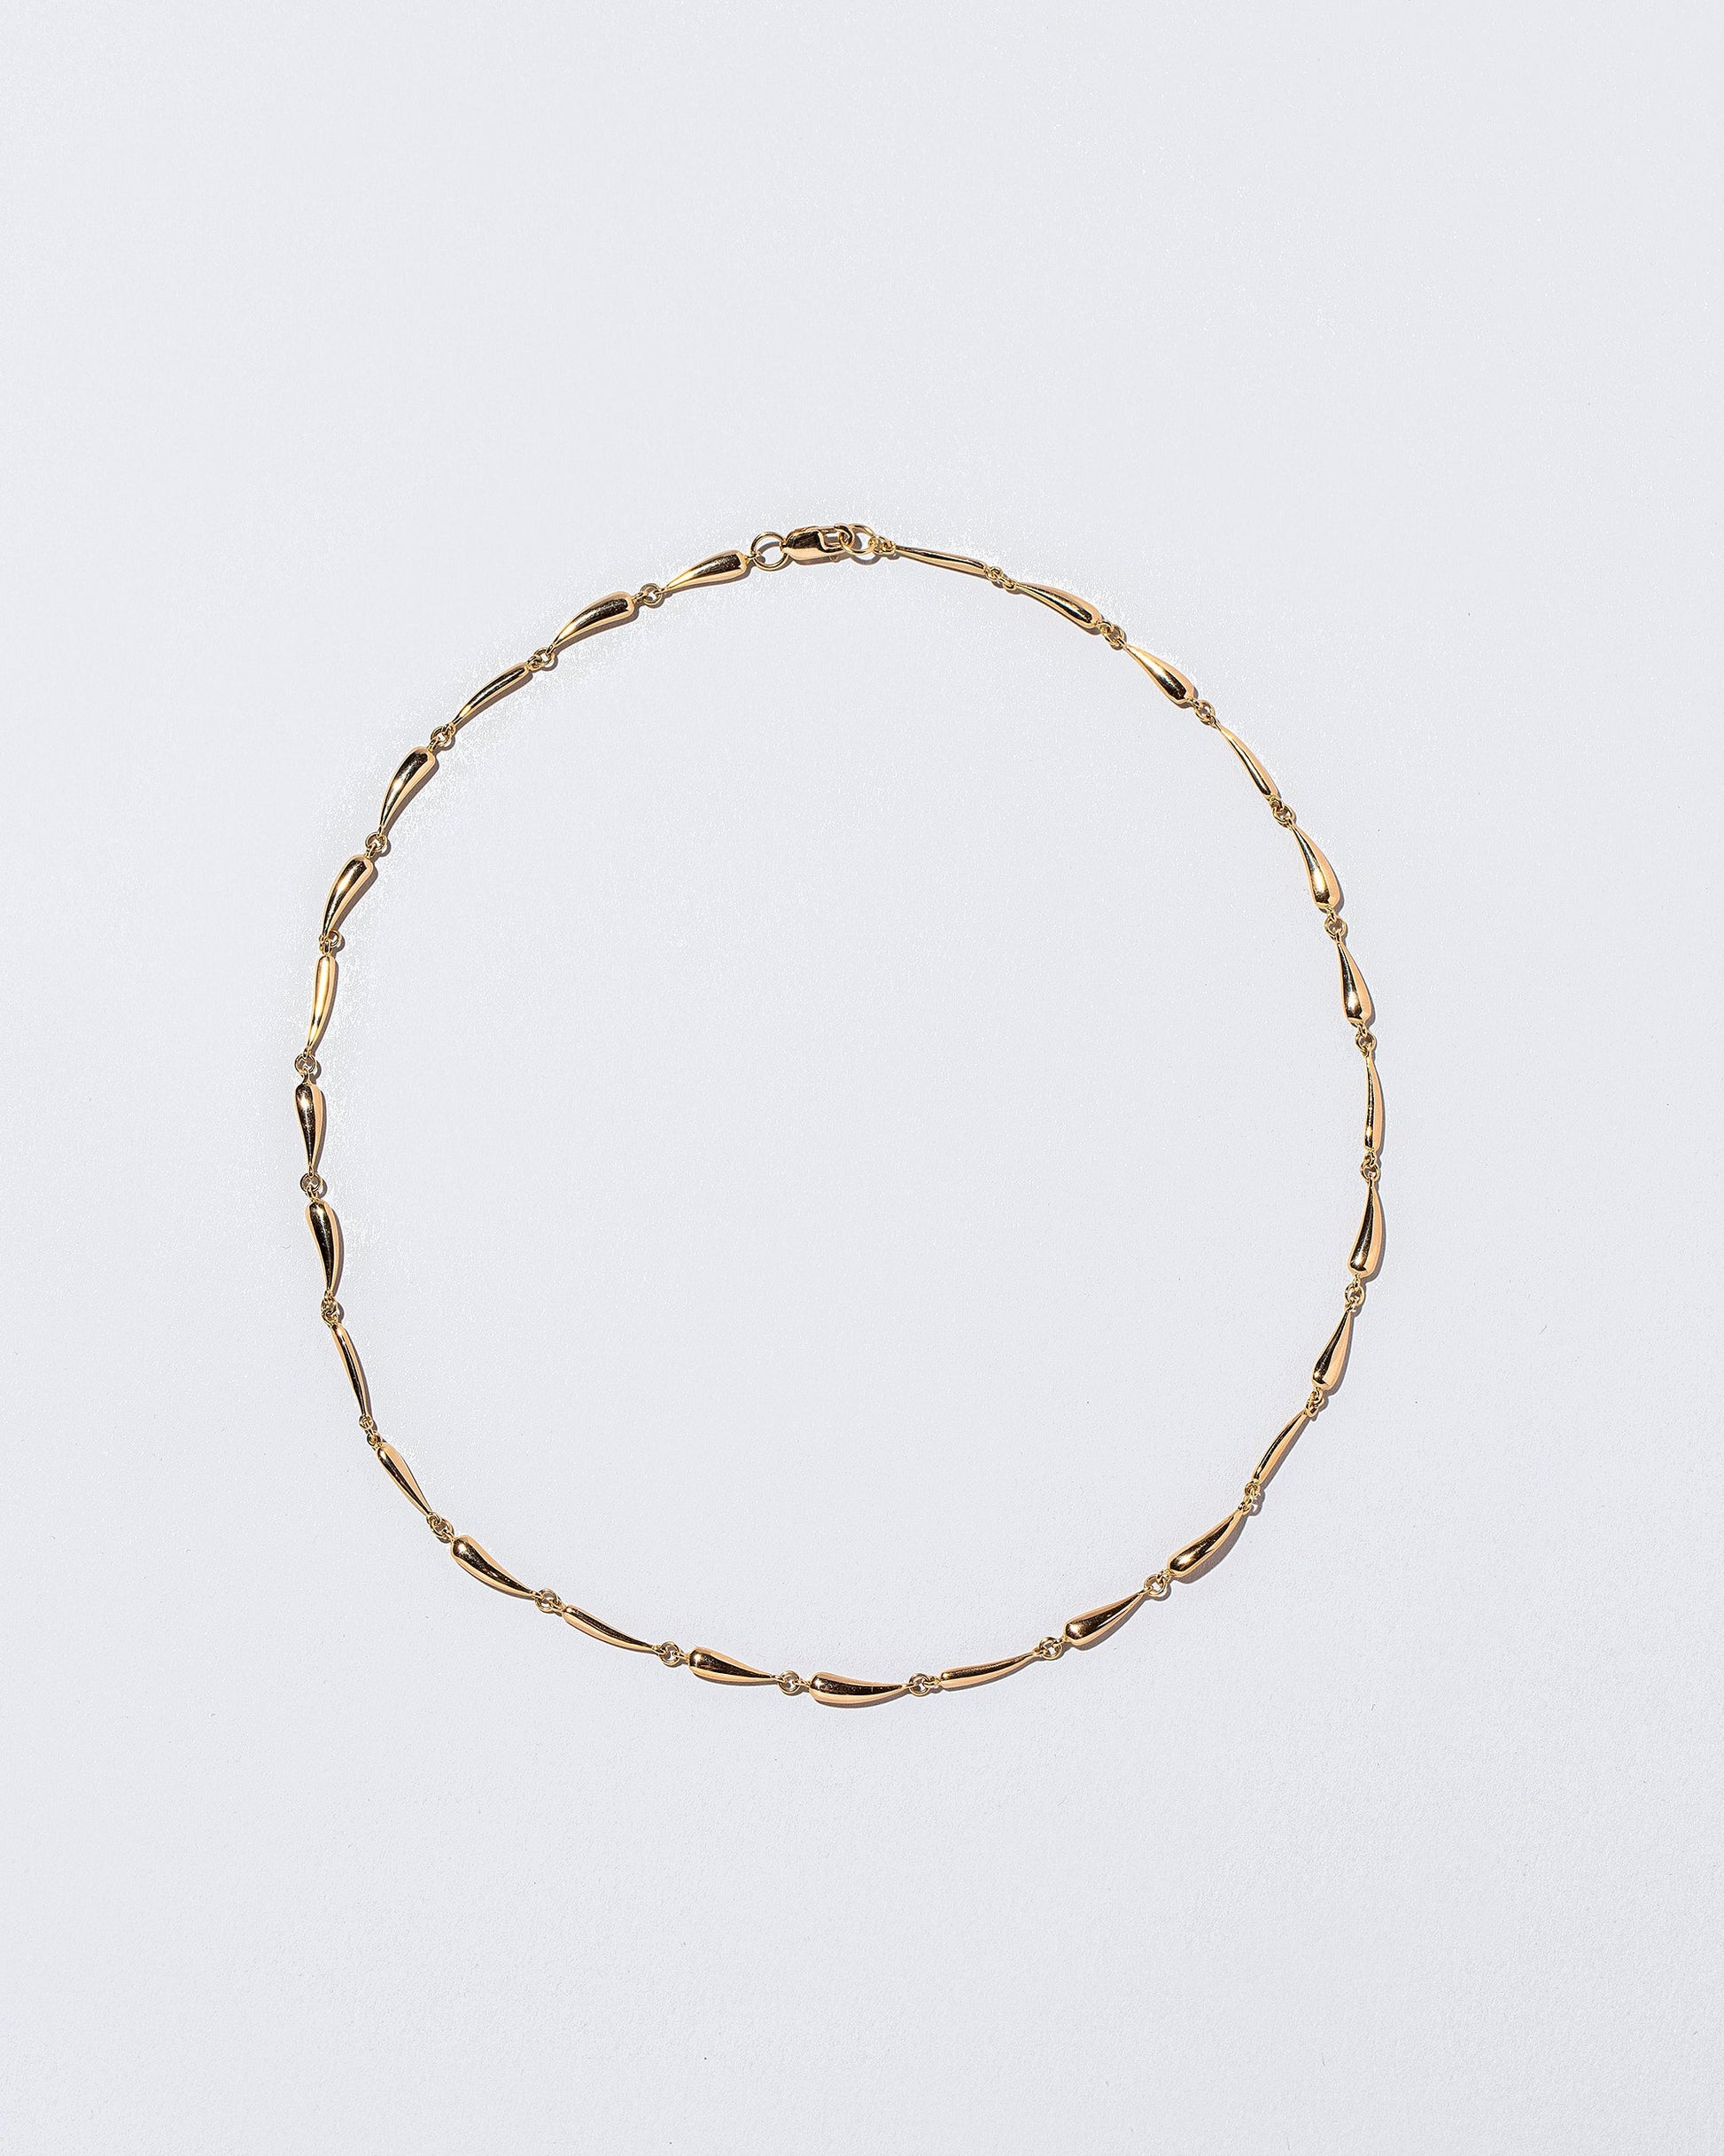 Gold Accumulation Necklace on light color background.